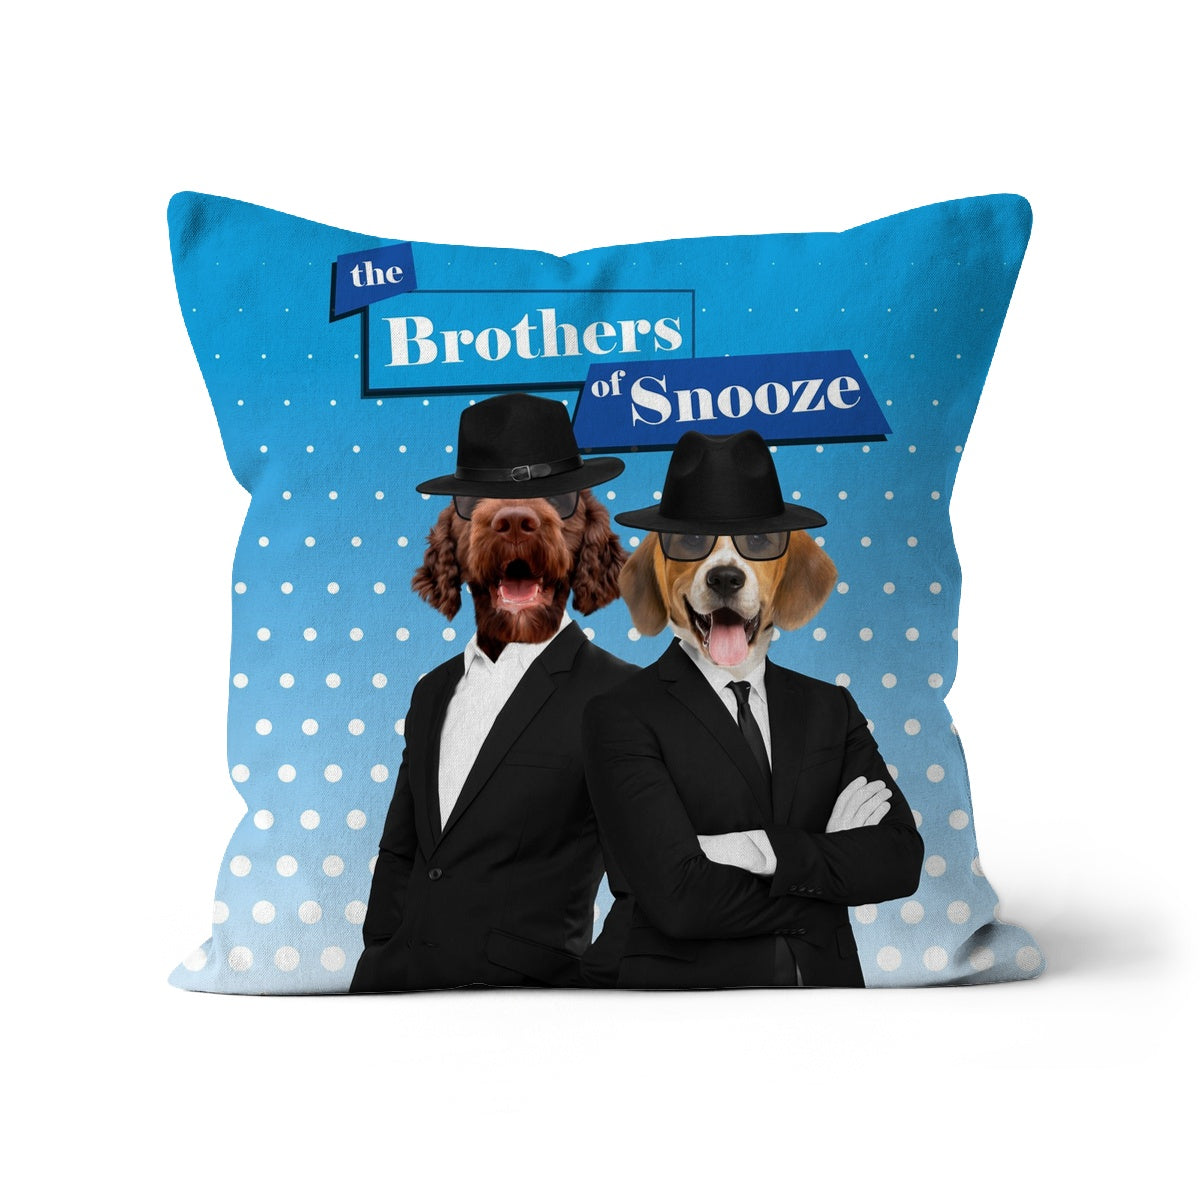 Paw & Glory, pawandglory, pillow of your dog, pillow custom, pet pillow, custom pillow design, customized throw pillows, pillows with dogs picture, Pet Portrait cushion,